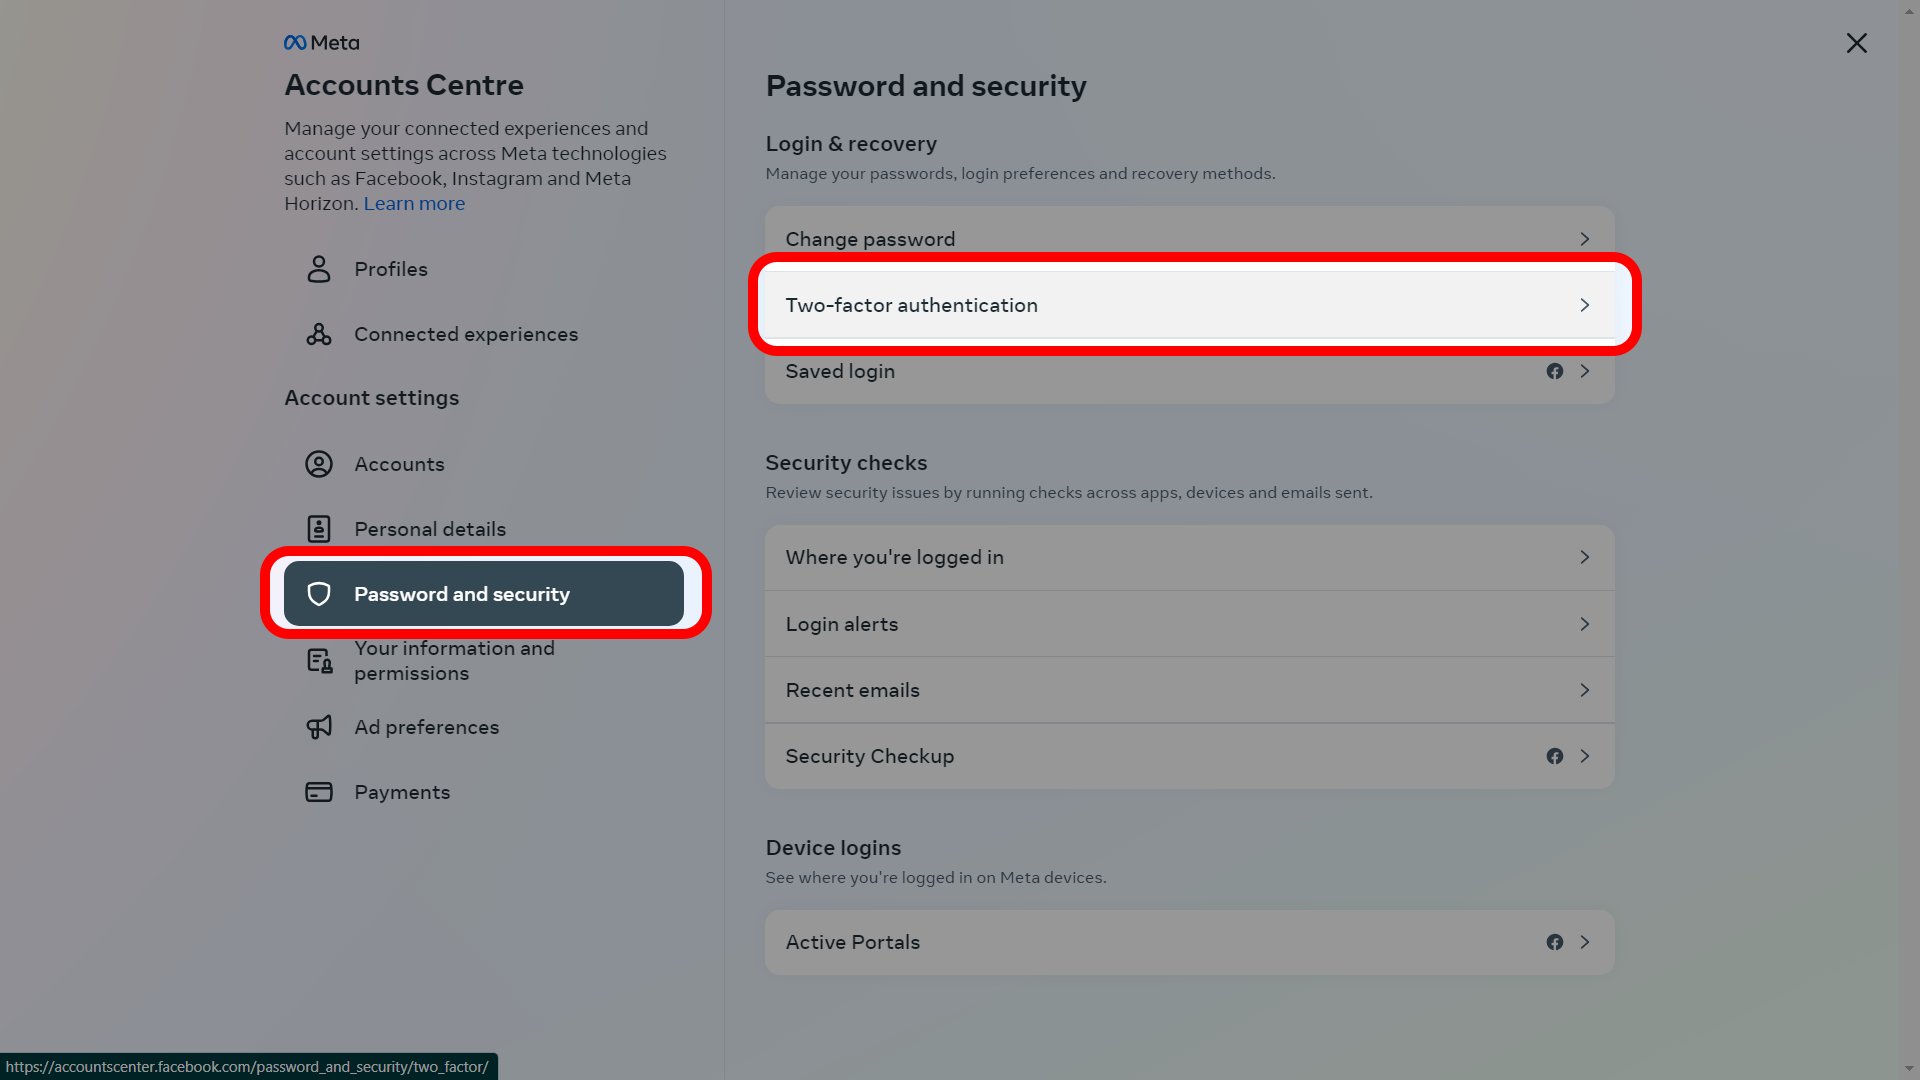 The Facebook Password and security page highlighting the Two-factor authentication option